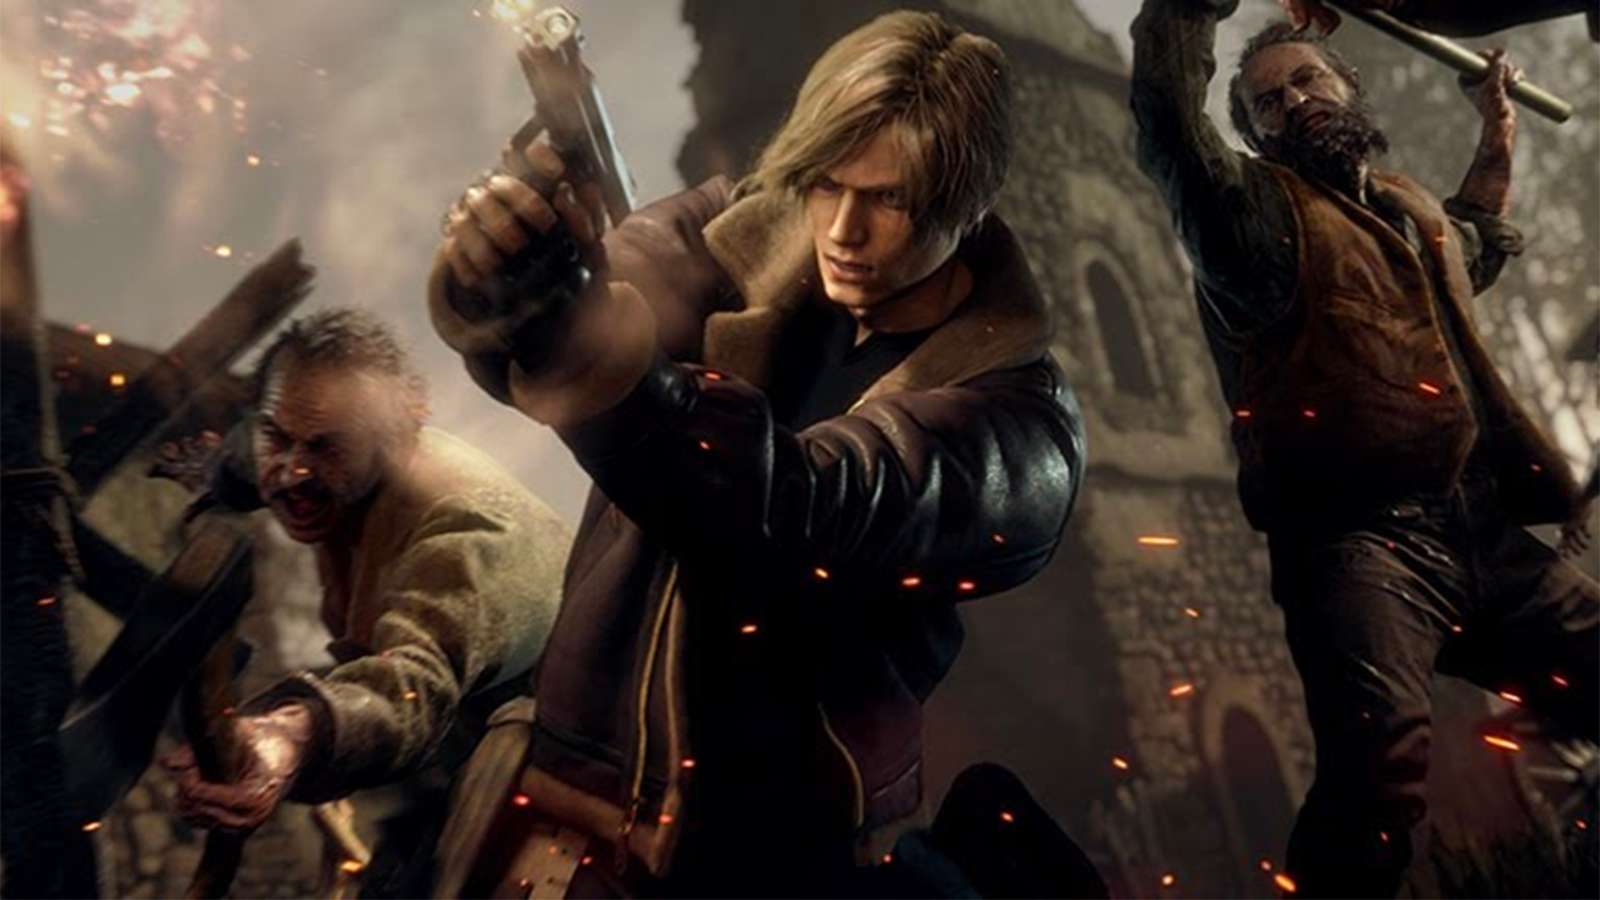 Leon is one of the Mercenaries characters in Resident Evil 4 remake